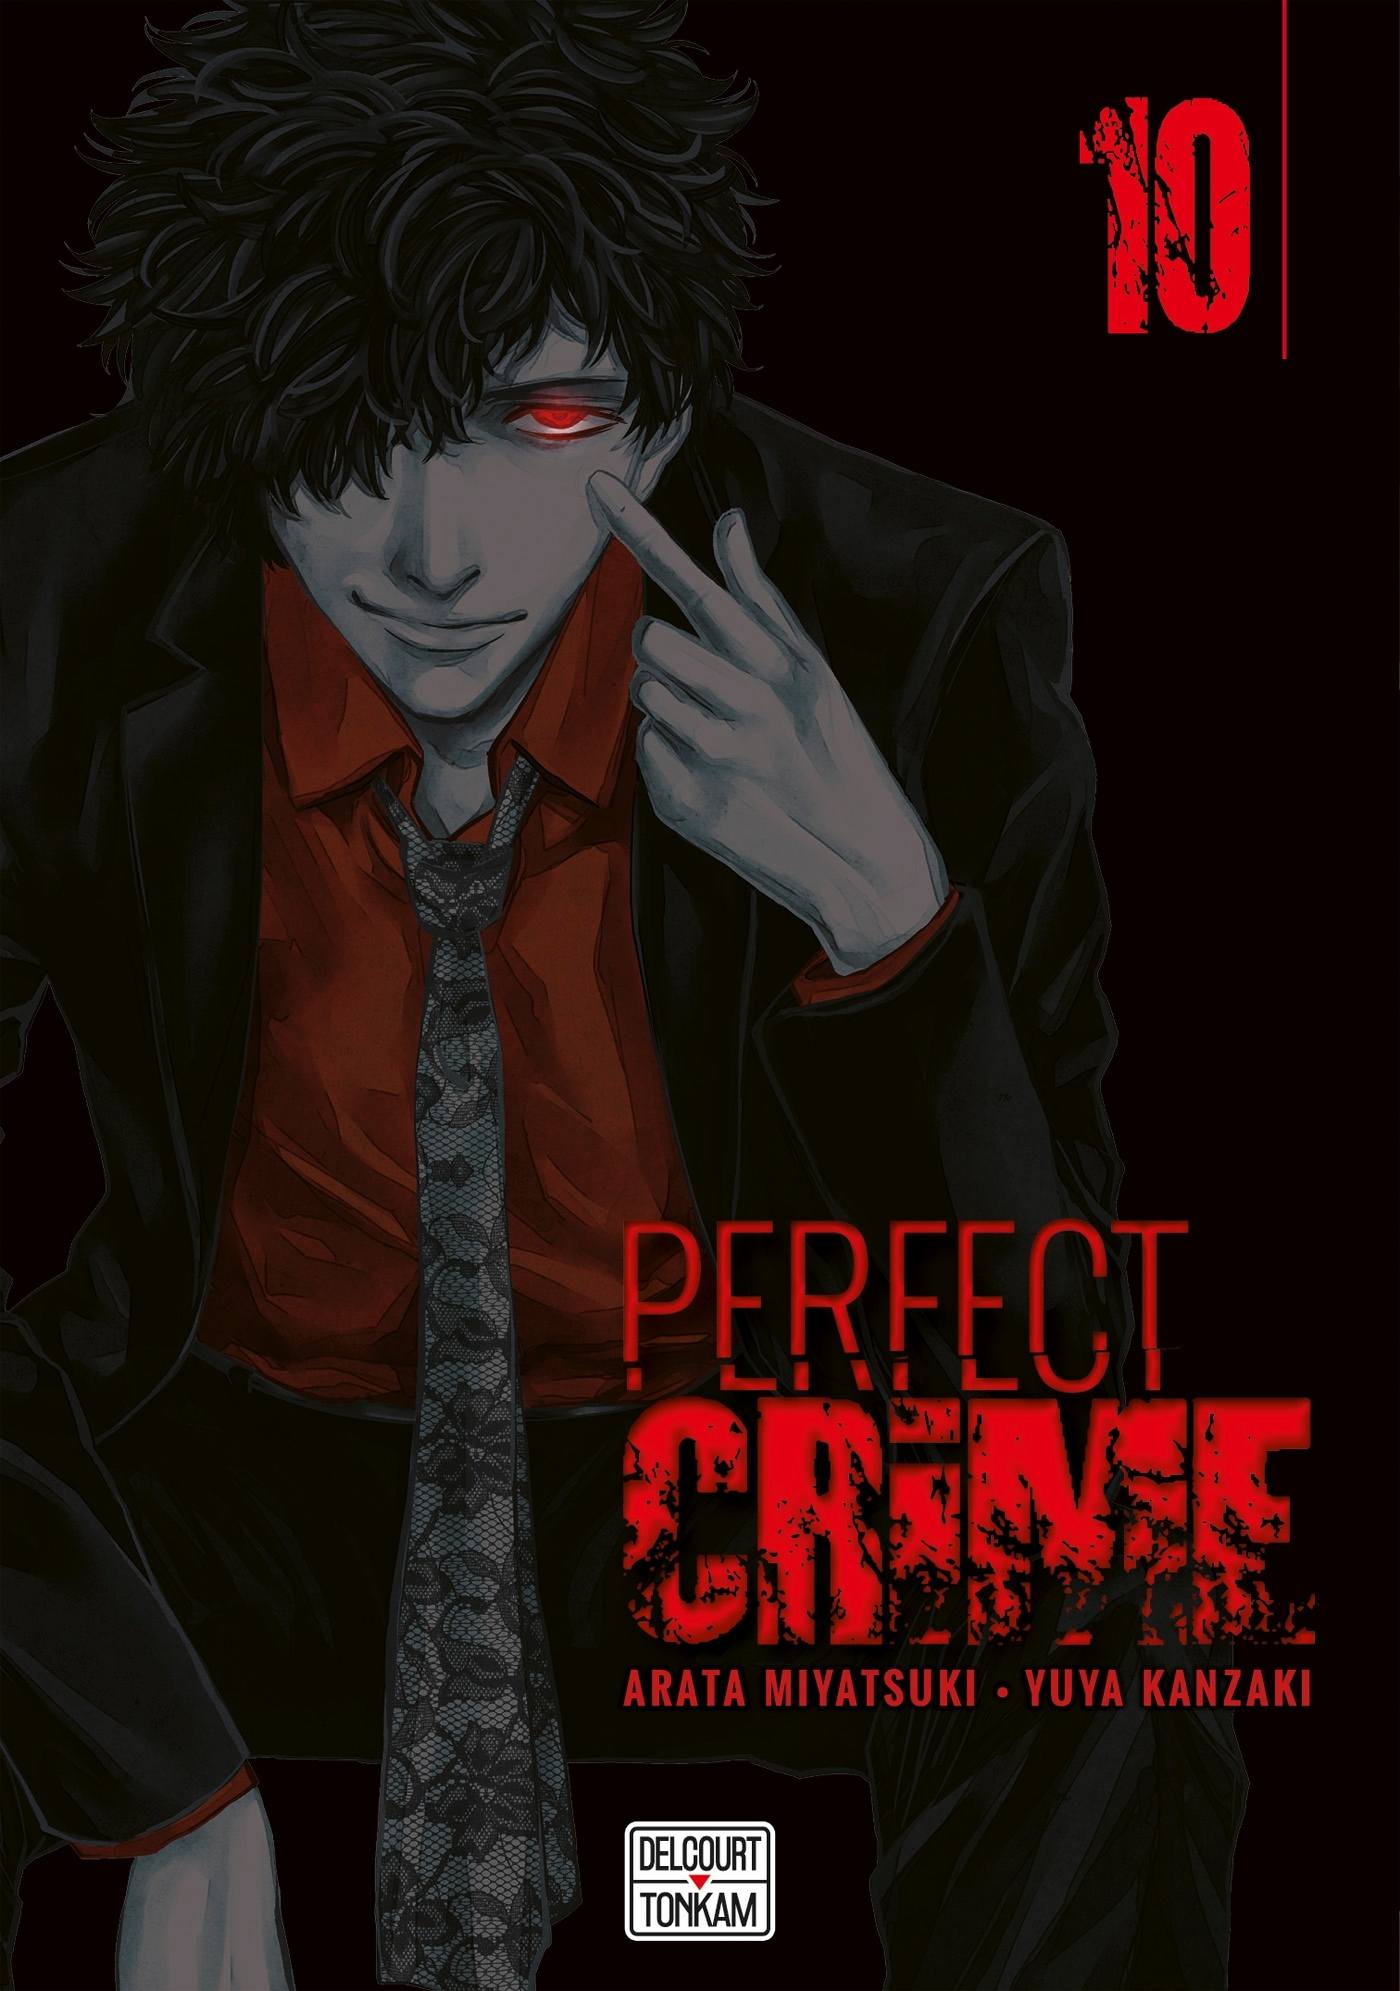 Perfect crime T10 (9782413028512-front-cover)